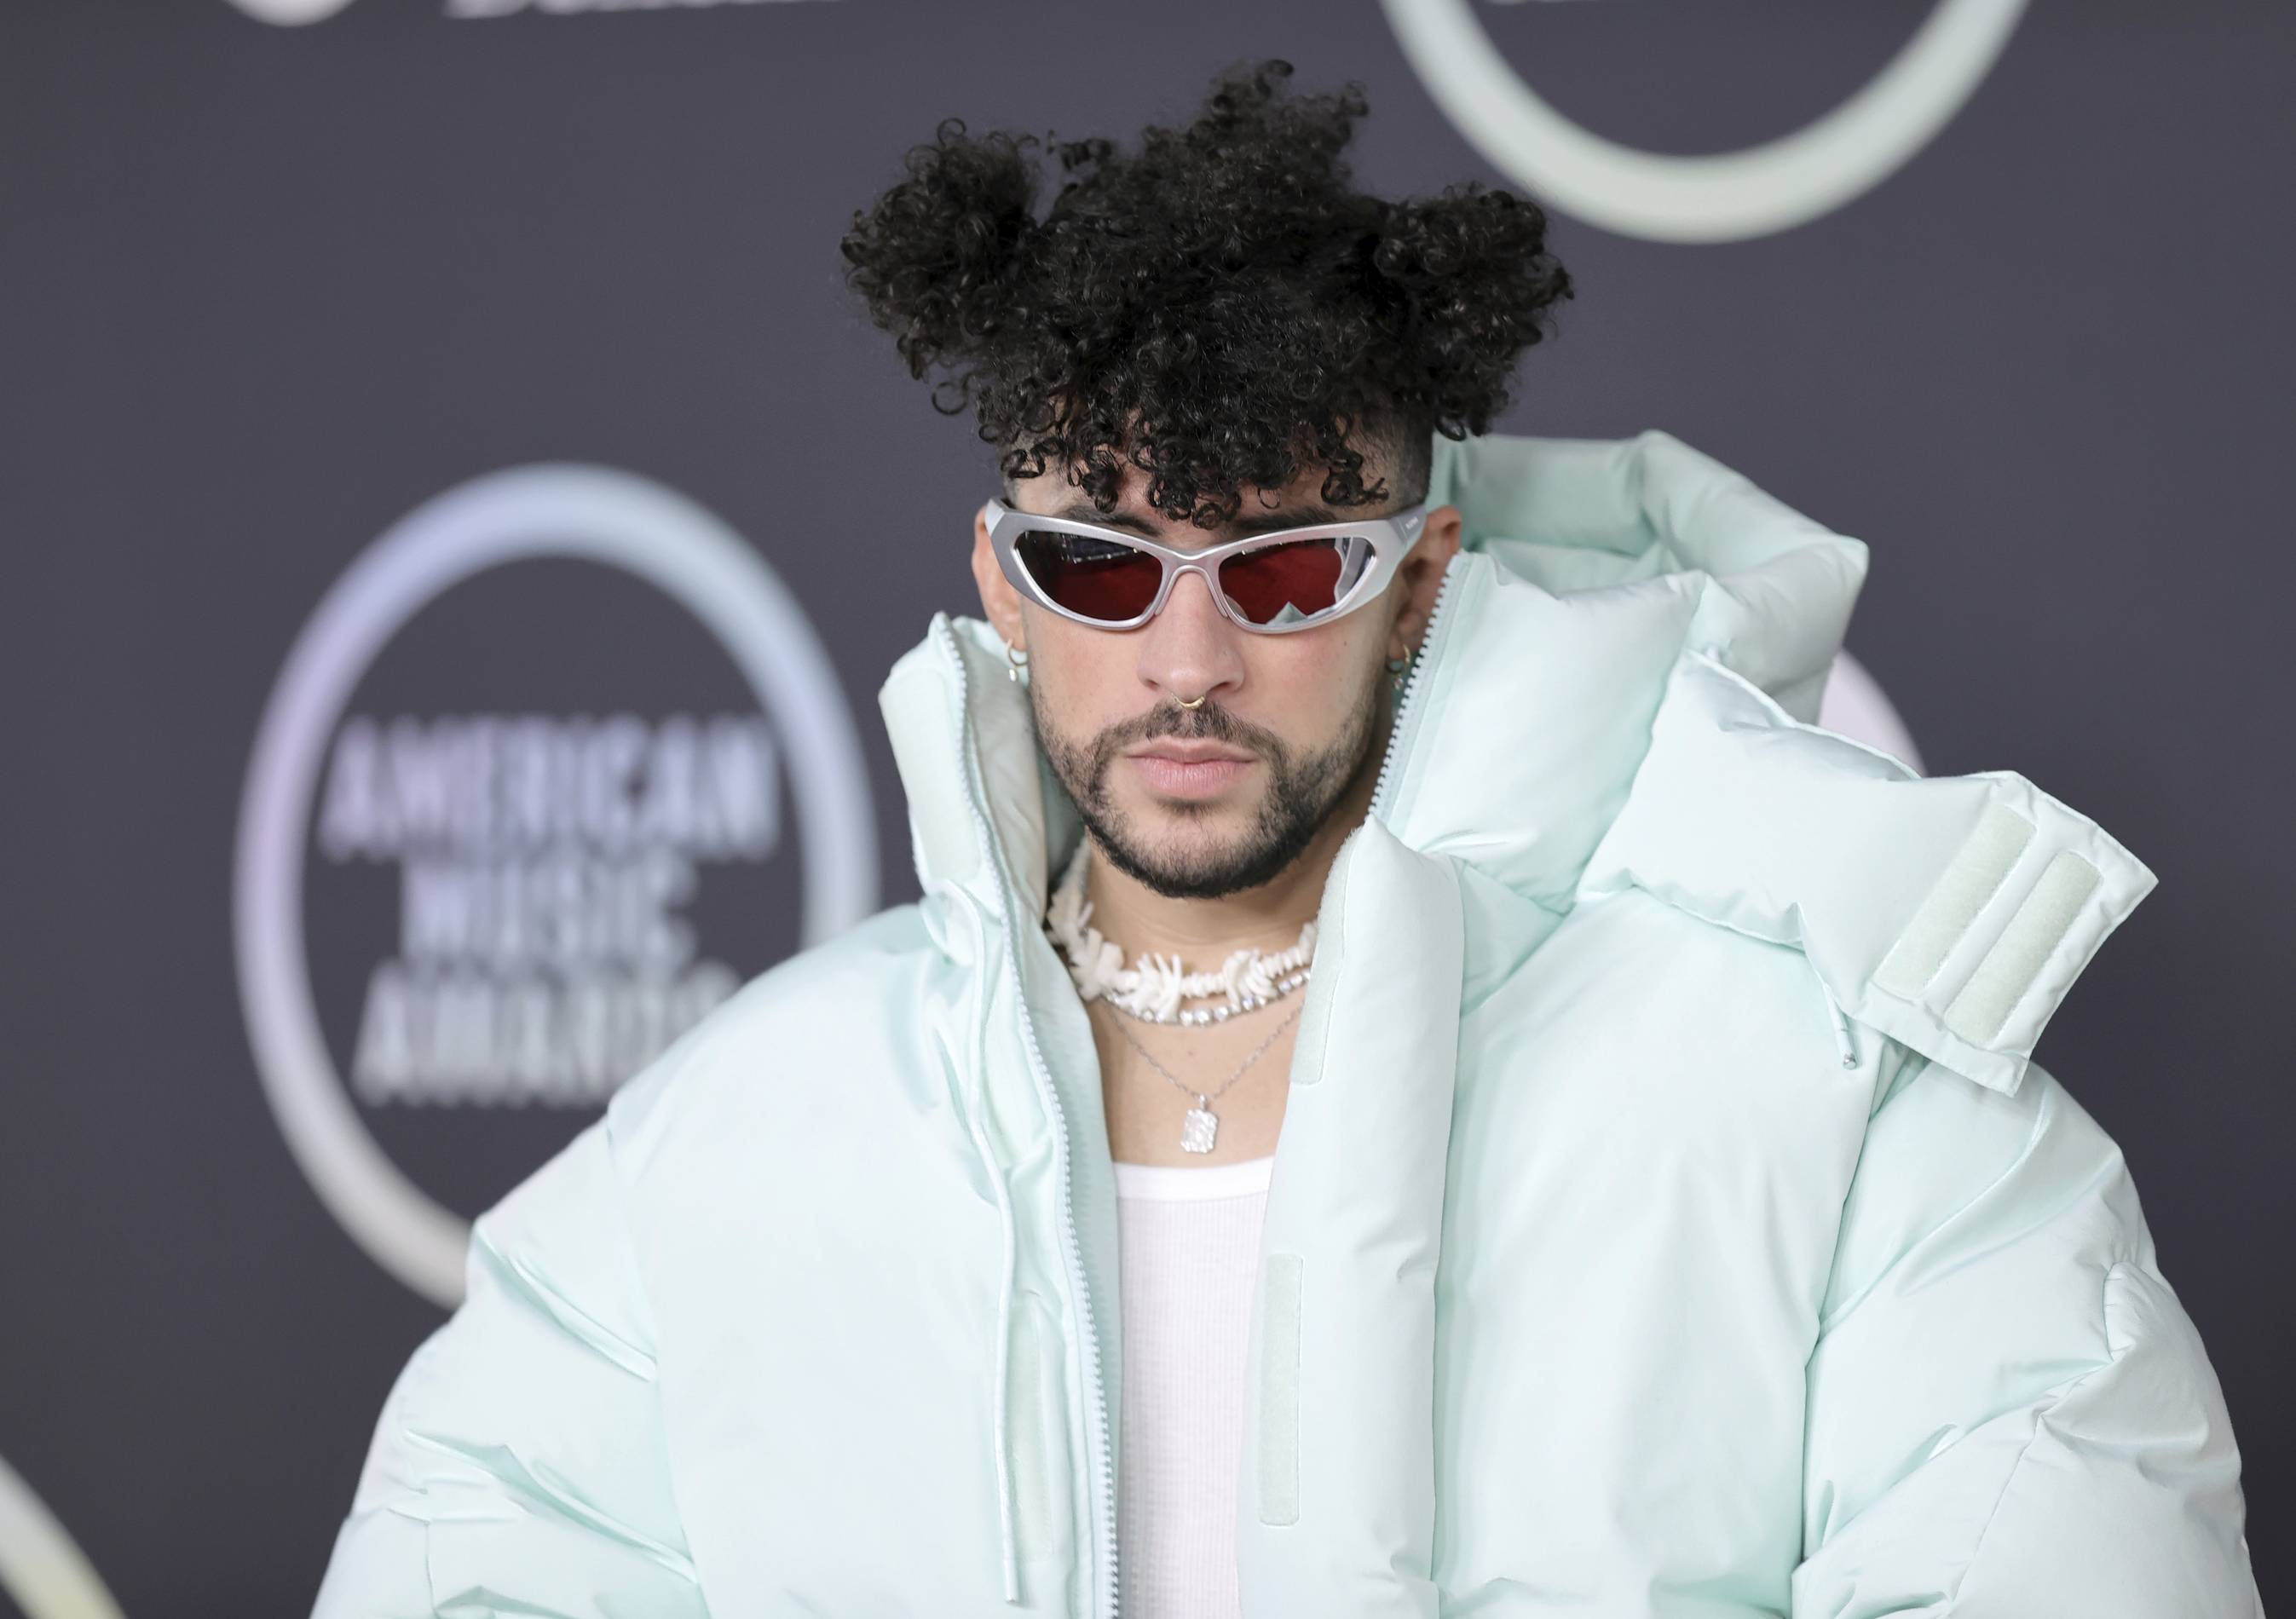 Bad Bunny at the American Music Awards in 2021